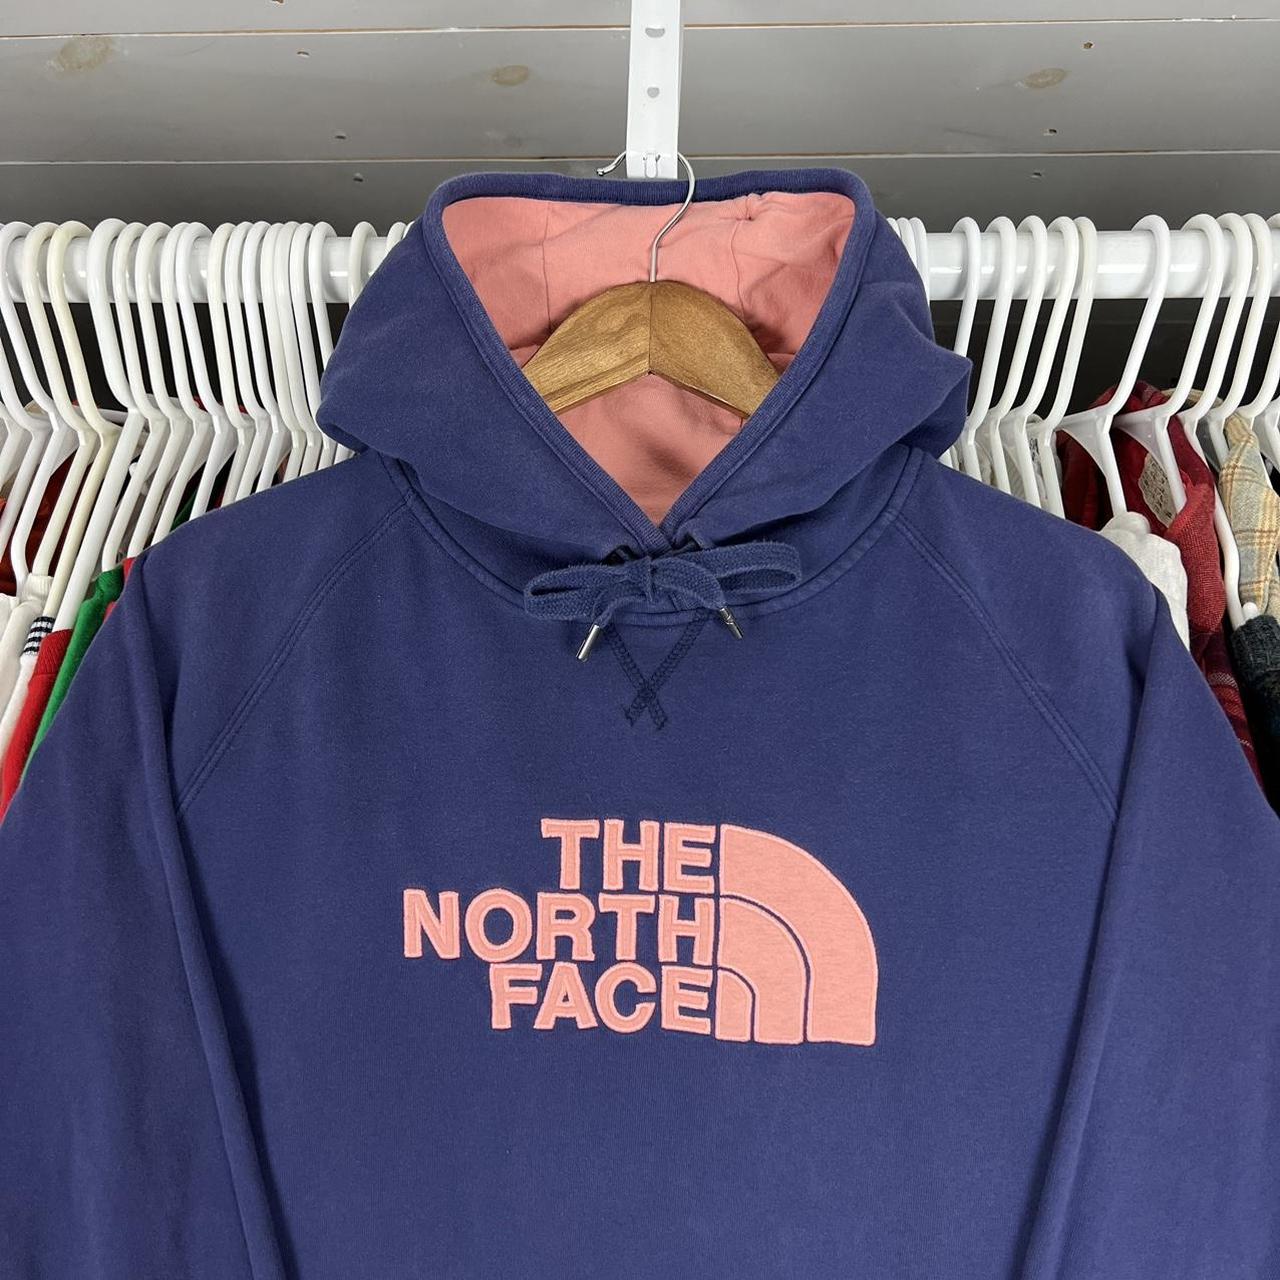 The North Face Women's Navy and Pink Hoodie (2)